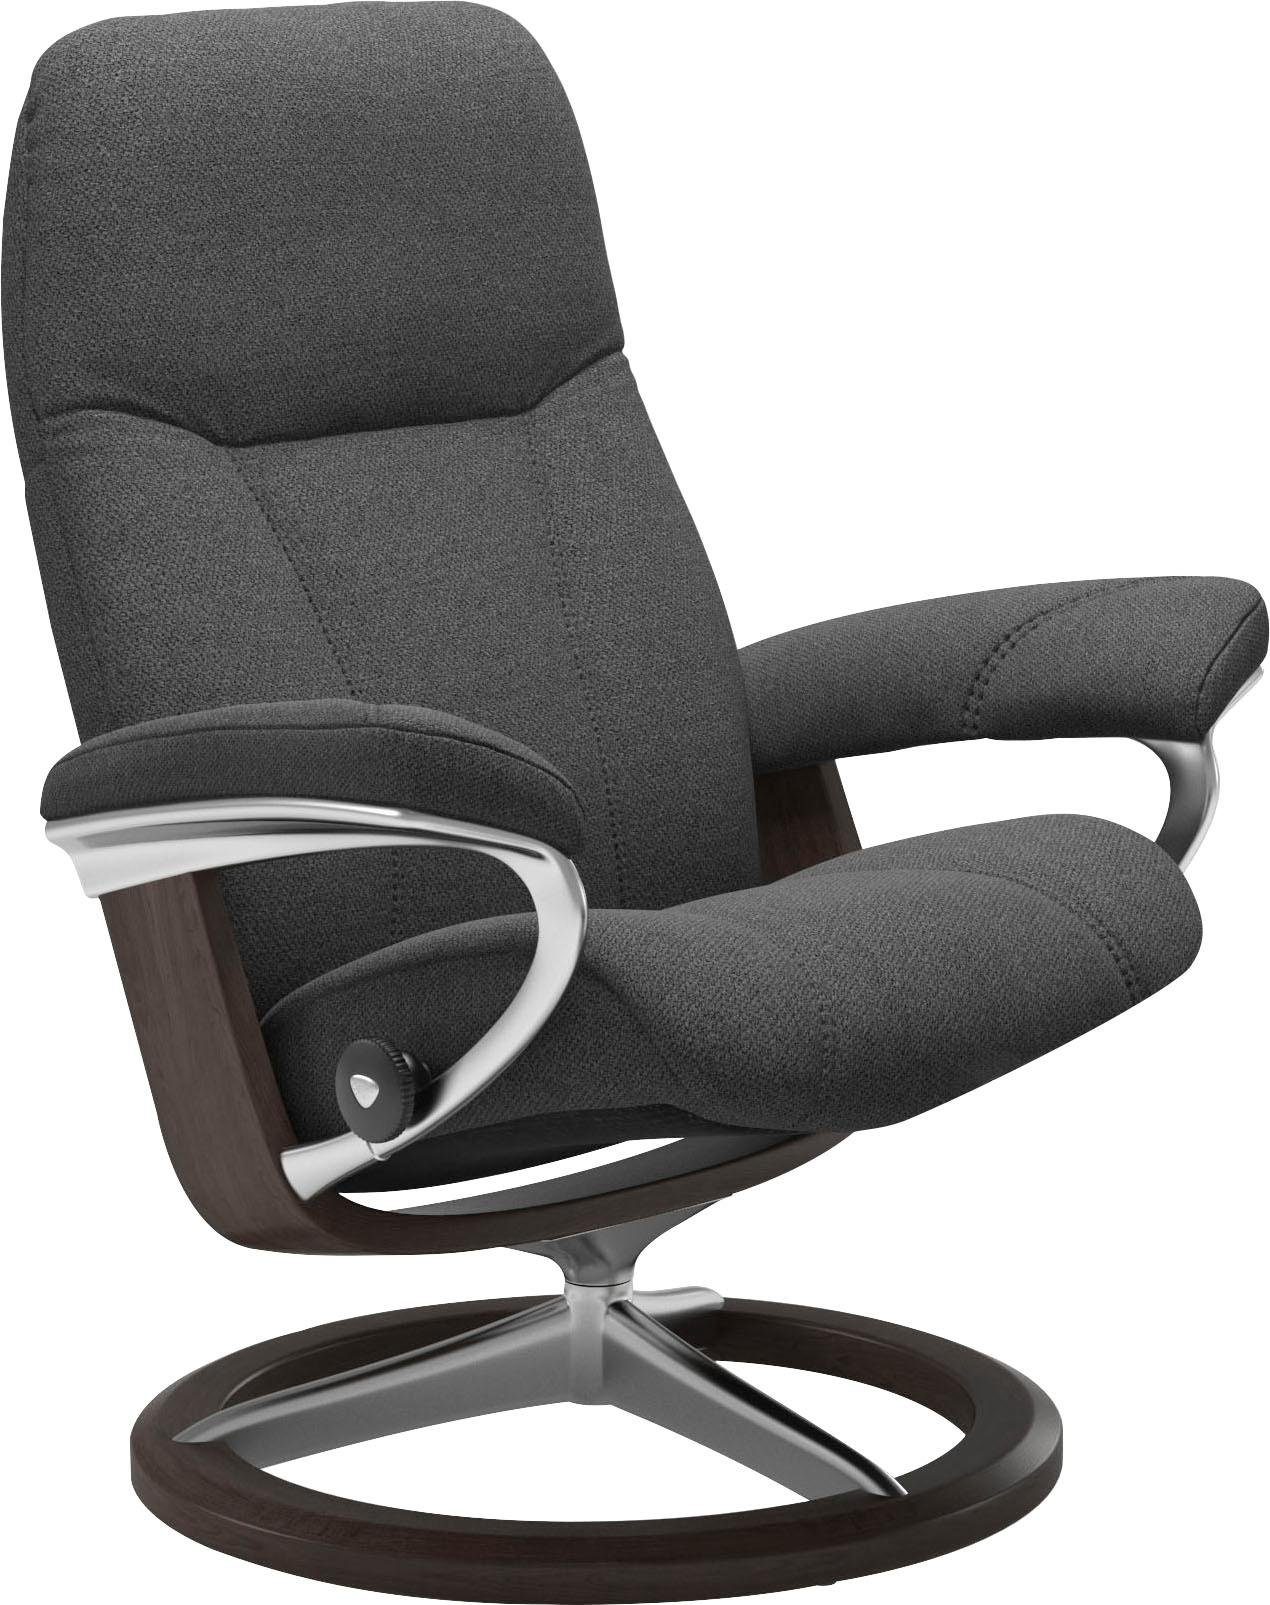 Stressless® Relaxsessel Consul, Gestell mit Signature Base, Größe L, Wenge